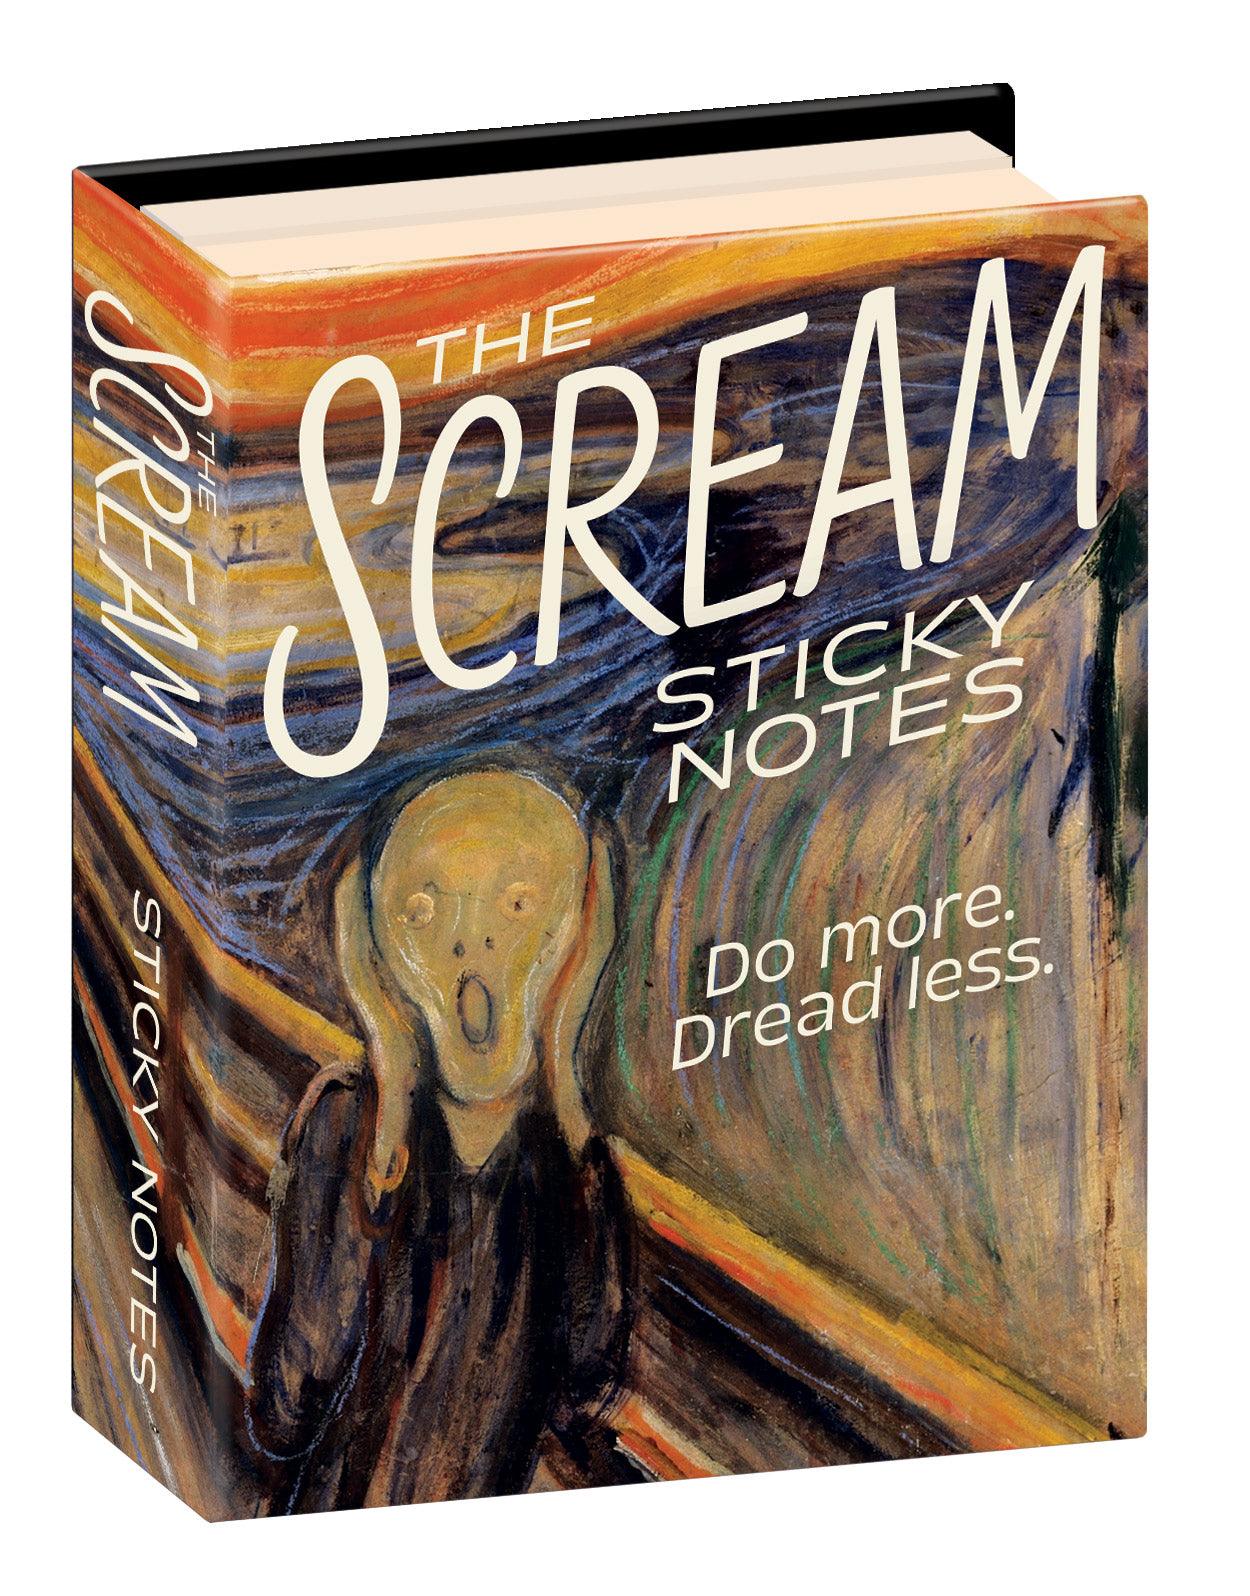 Product photo of Scream Sticky Notes, a novelty gift manufactured by The Unemployed Philosophers Guild.